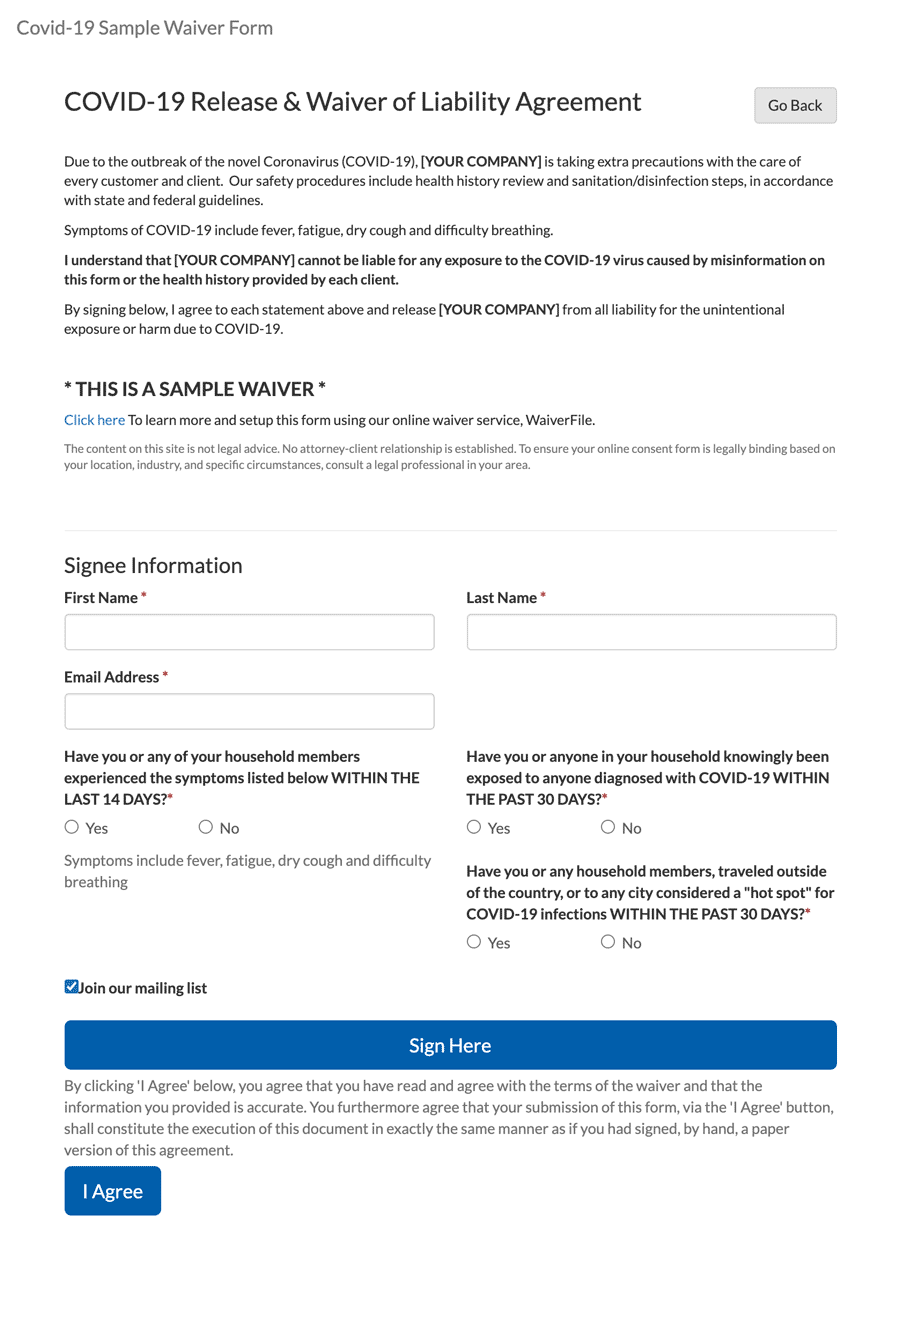 Sample Covid-19 Waiver Form with Health Questionnaire